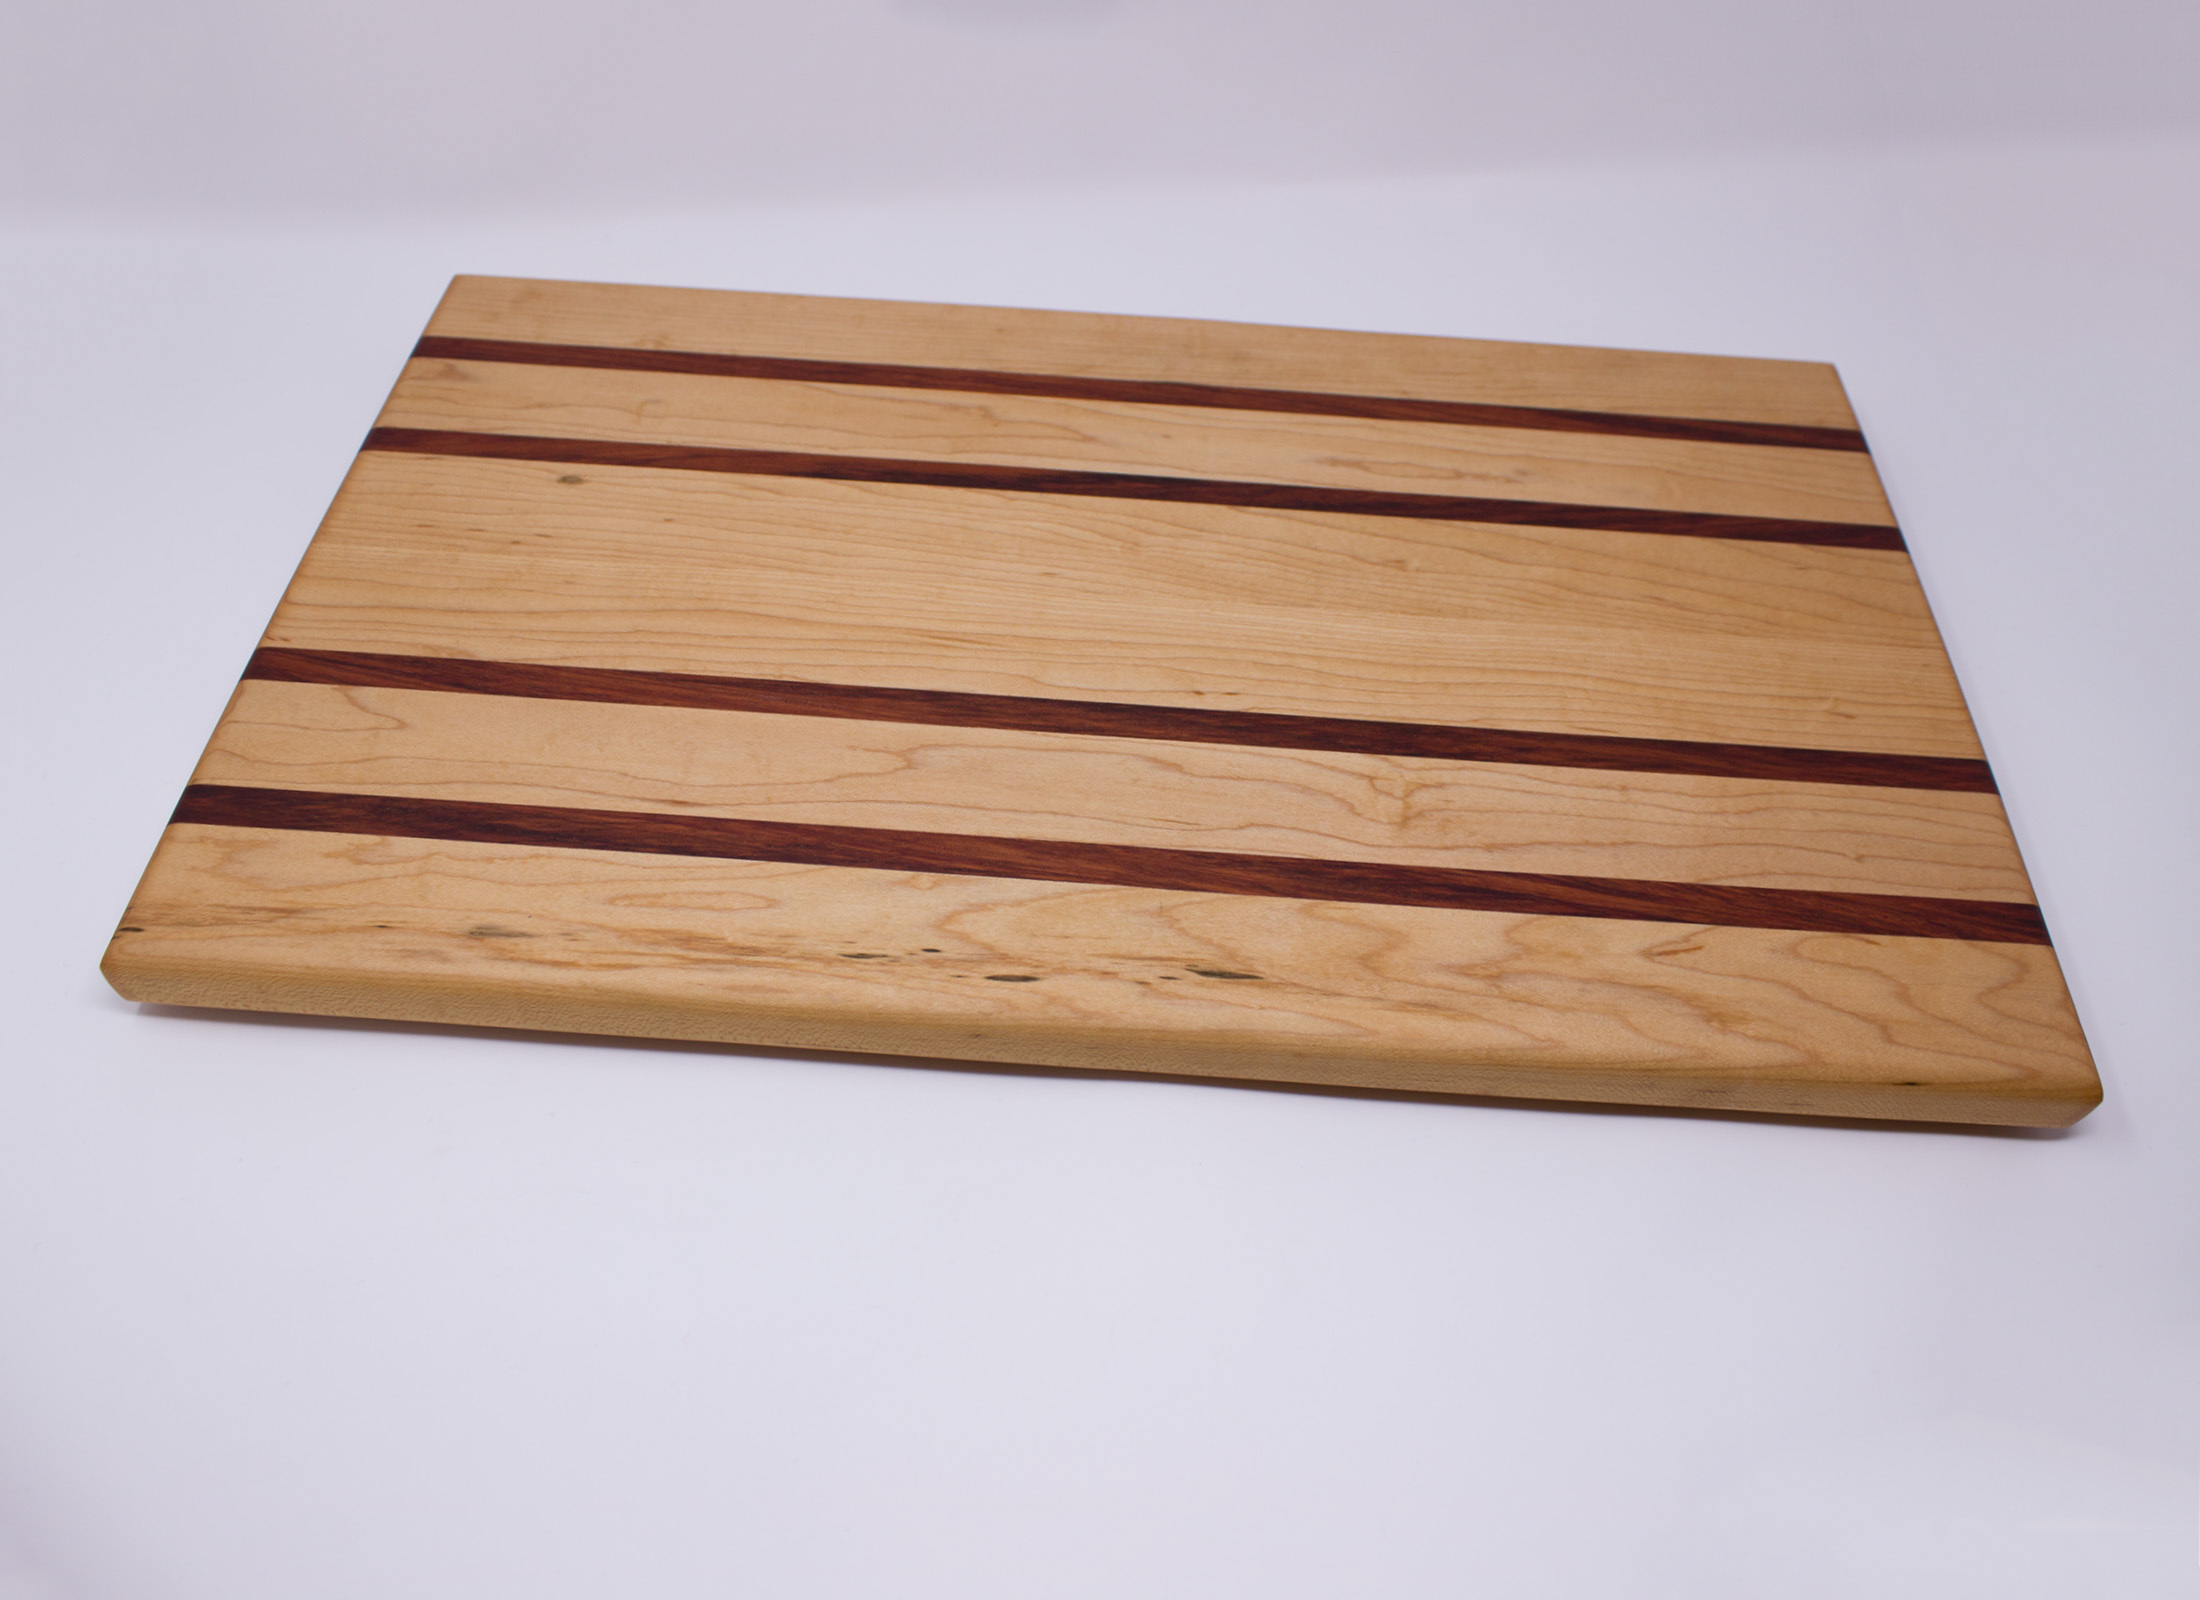 https://www.rockfordwoodcrafts.com/wp-content/uploads/Large-Maple-with-Four-Red-Stripes-Cutting-Board-Front-Angled.jpg